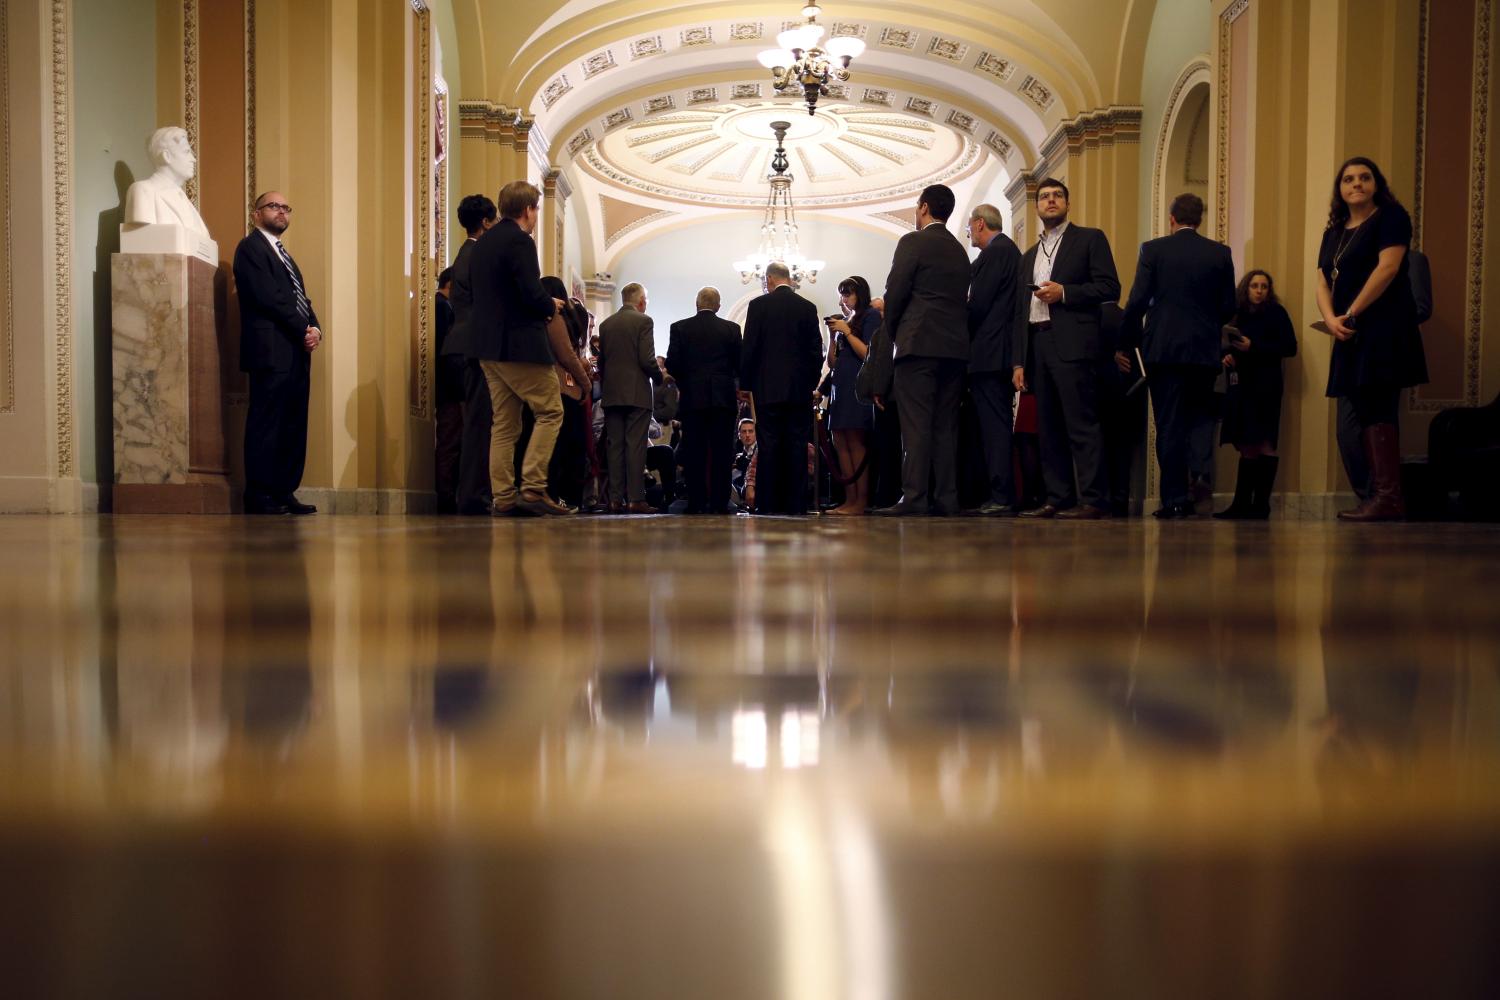 Reporters gather around U.S. Senate Democratic leaders as they talk to reporters during a news conference following a party policy lunch meeting at the U.S. Capitol in Washington, January 20, 2016. Members of the U.S. Congress have been spending fewer days working in Washington since the late 2000s, according to a Reuters review of congressional records going back 18 years. Picture taken January 20, 2016. To match Insight USA-CONGRESS/WORKINGDAYS  REUTERS/Carlos Barria